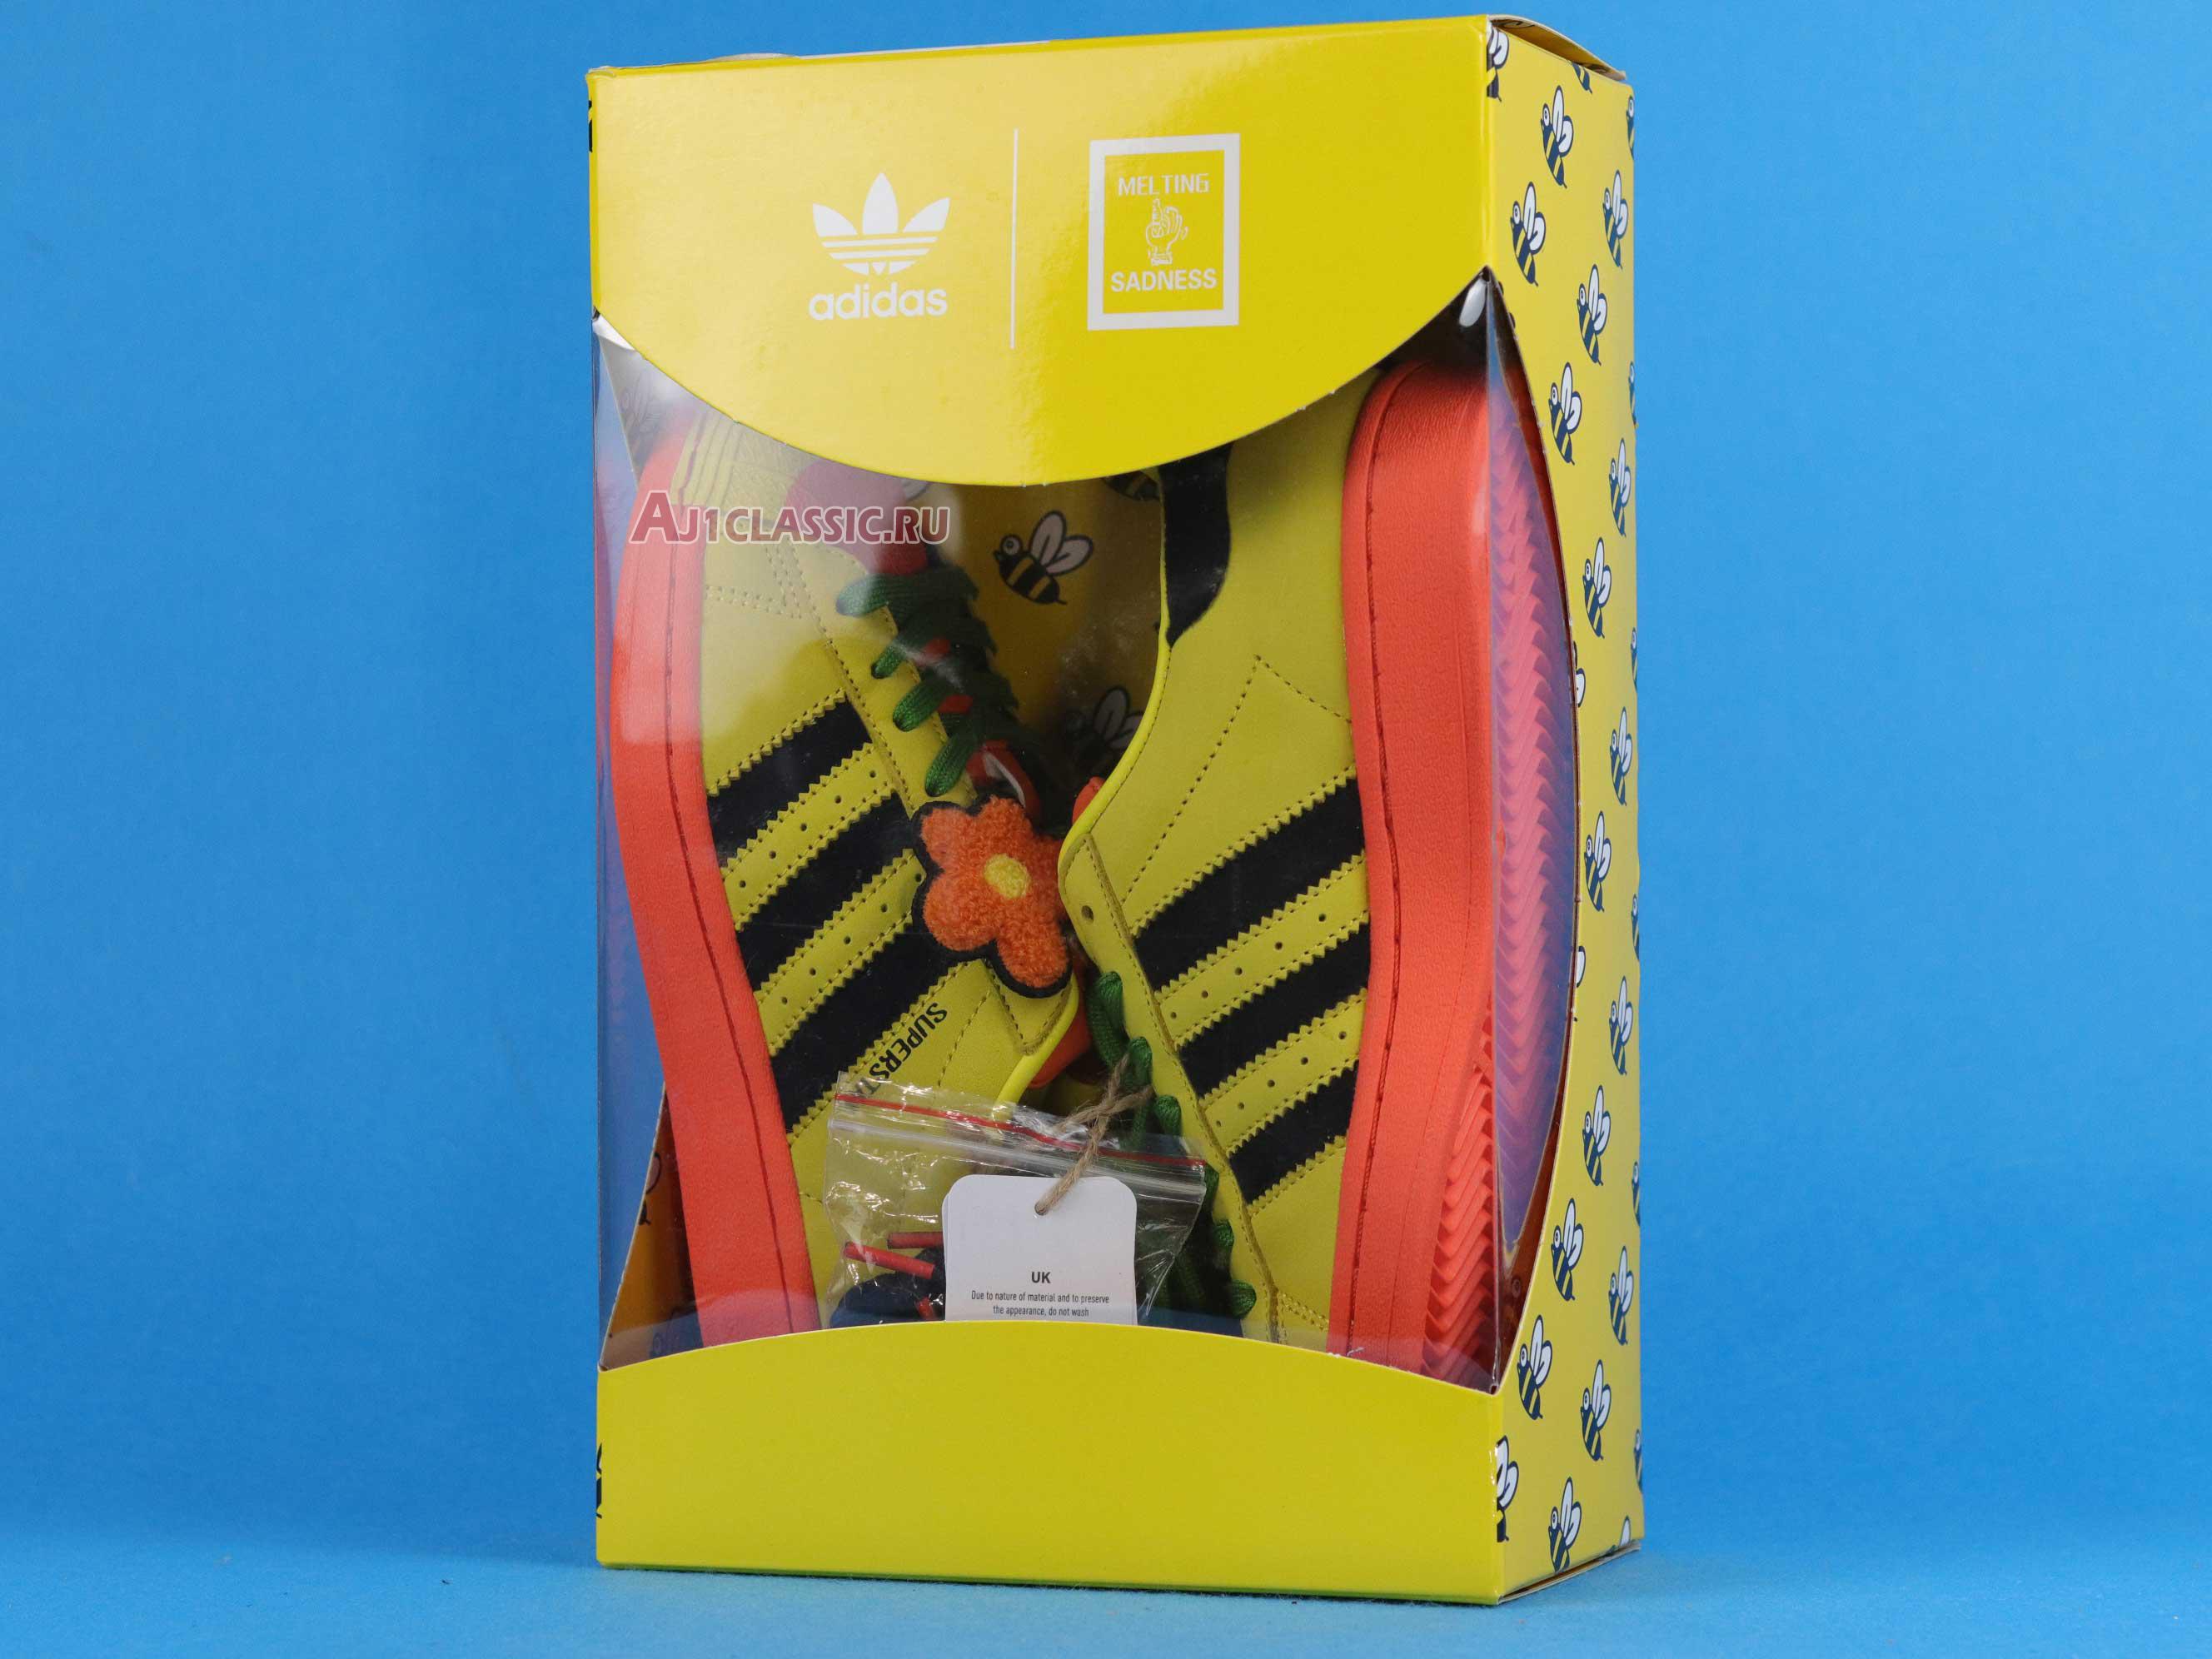 Melting Sadness x Adidas Superstar Bee with You Pack - Yellow FZ5254 Yellow/Core Black/Super Orange Sneakers